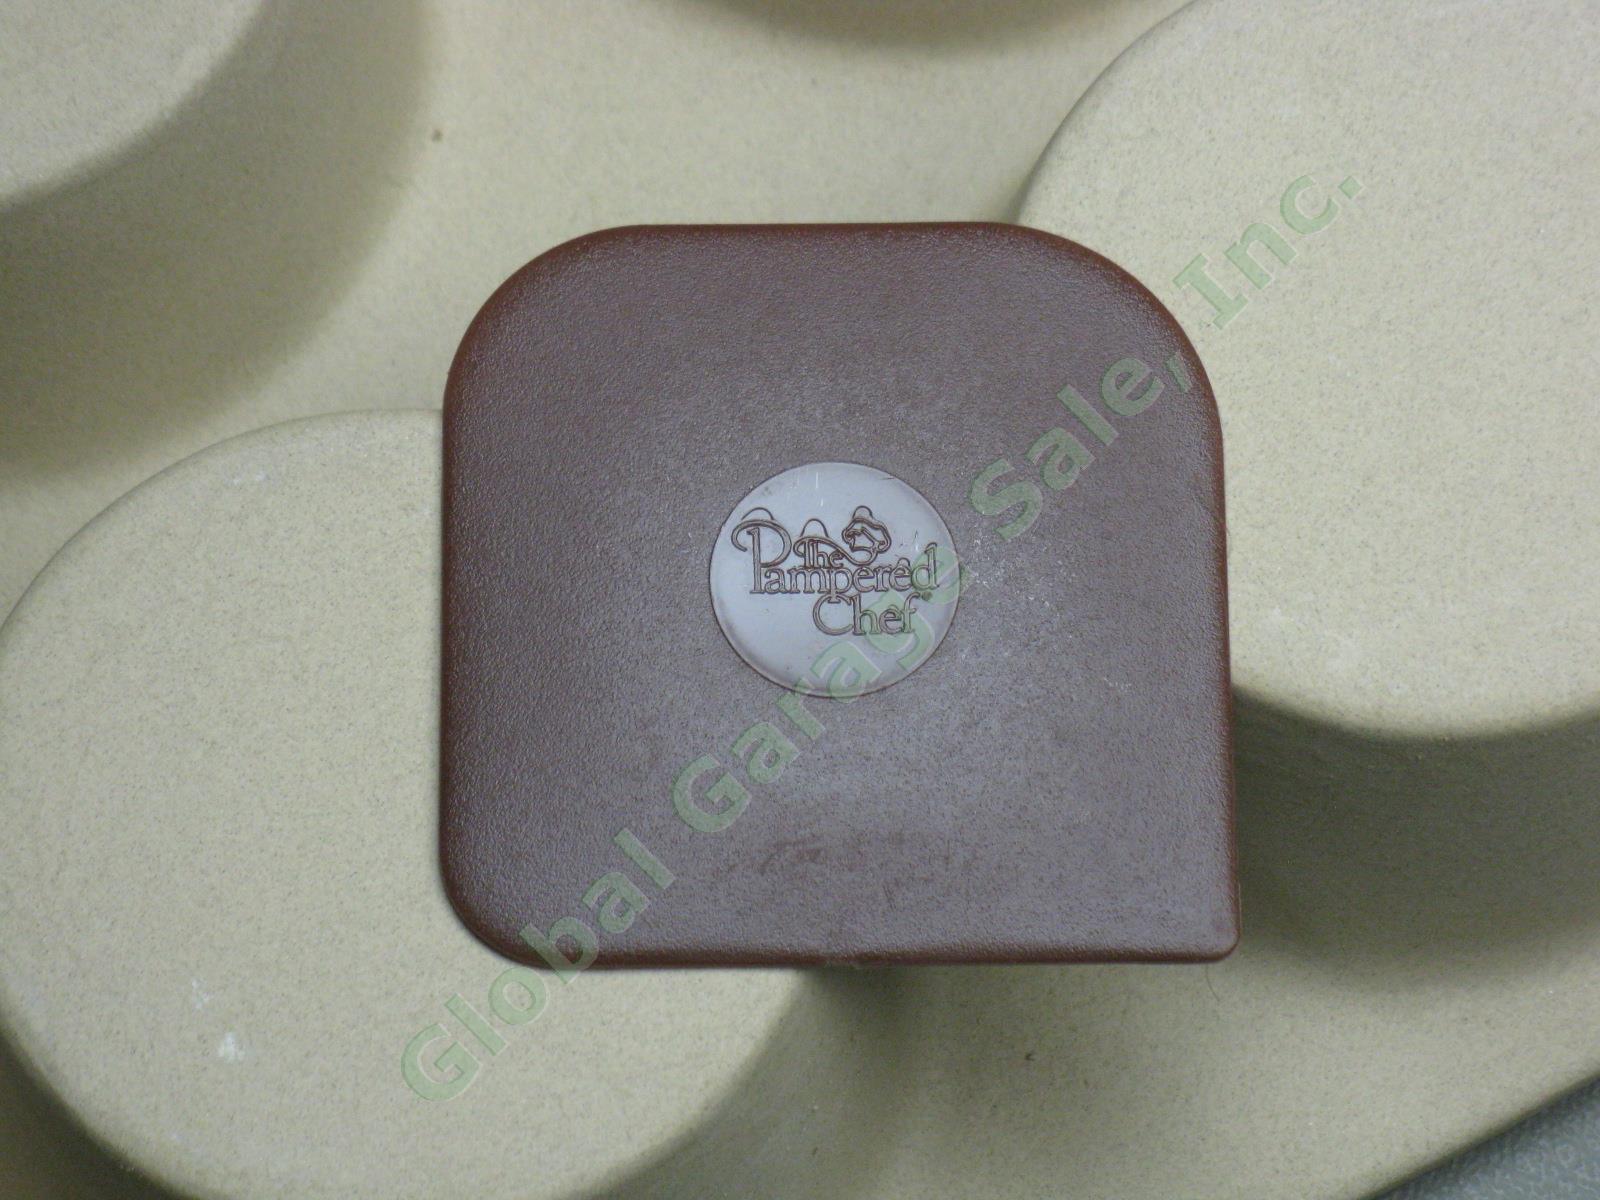 NIB! The Pampered Chef Family Heritage Stoneware 12-Muffin Pan #1465 11"x15" NR! 3